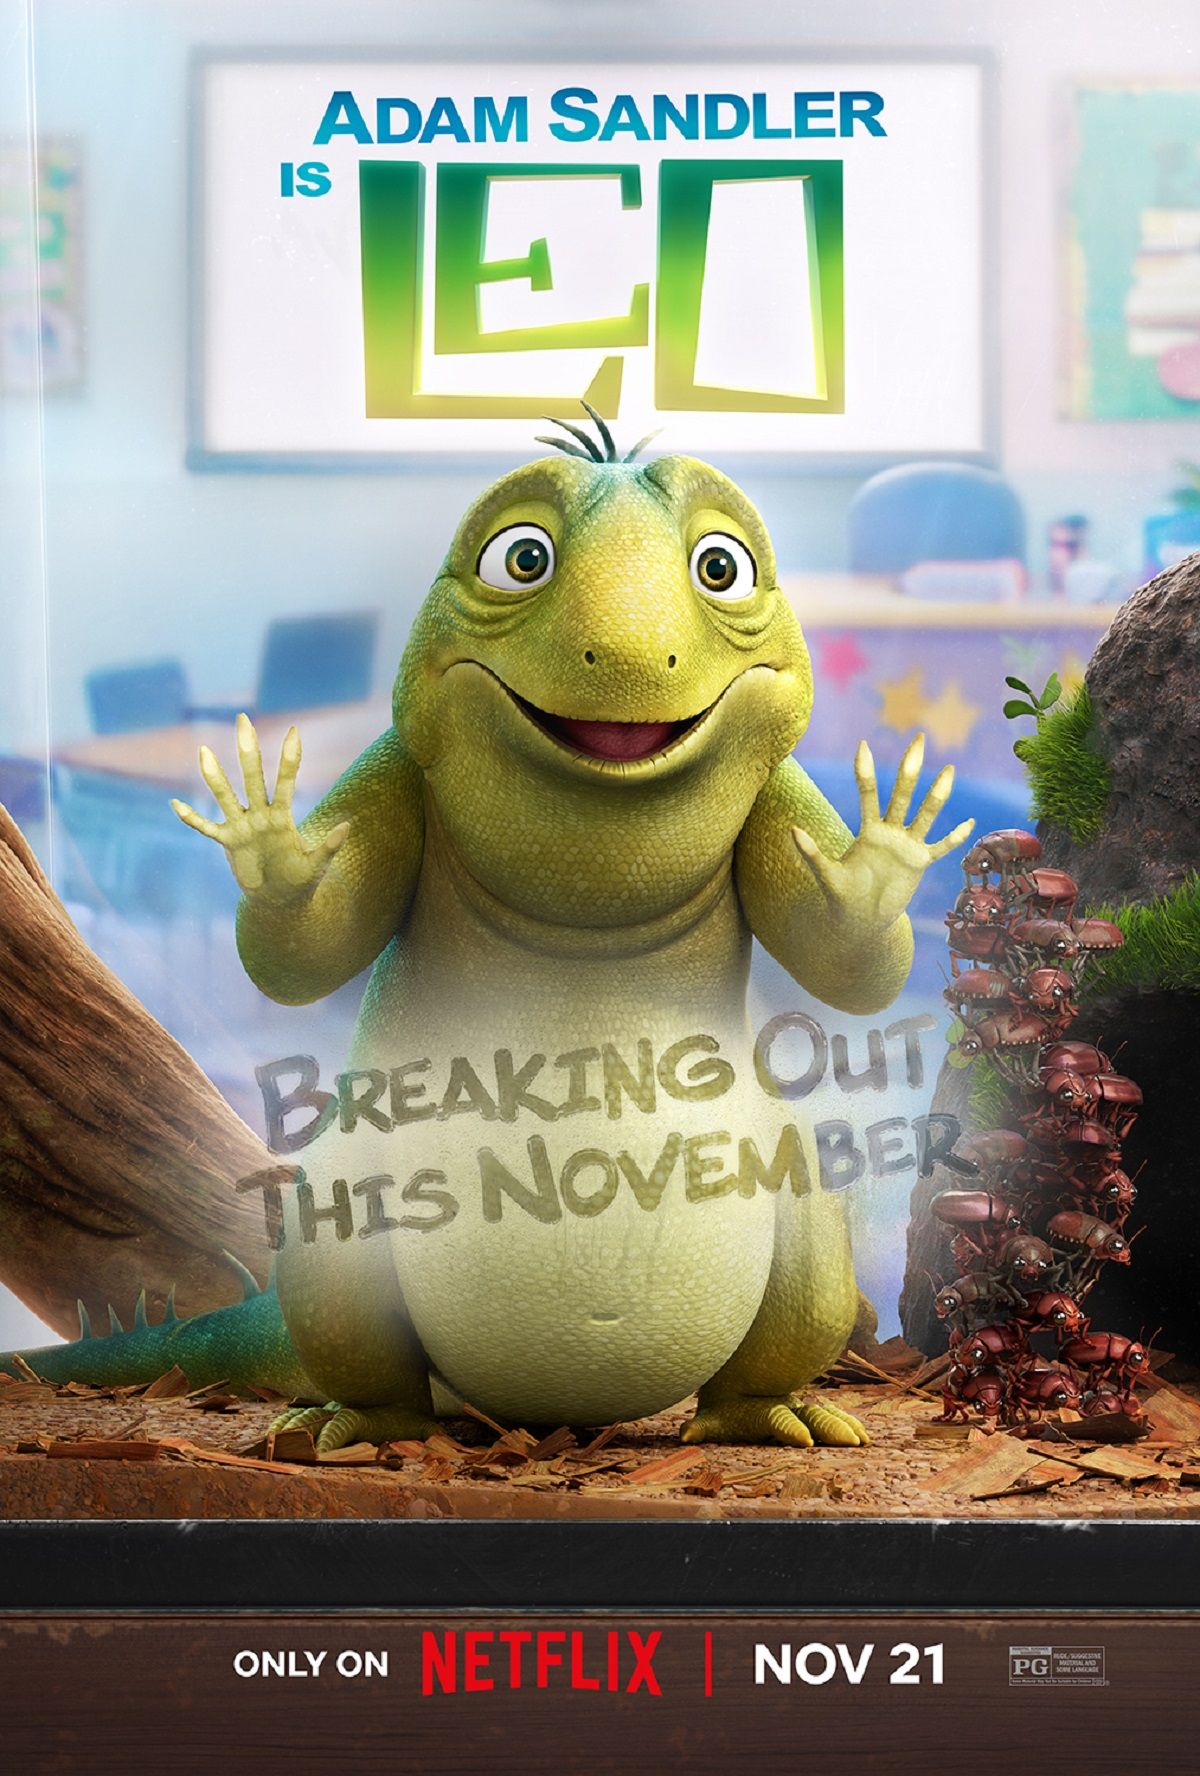 Leo trailers and posters show Adam Sandler as a jaded old lizard on